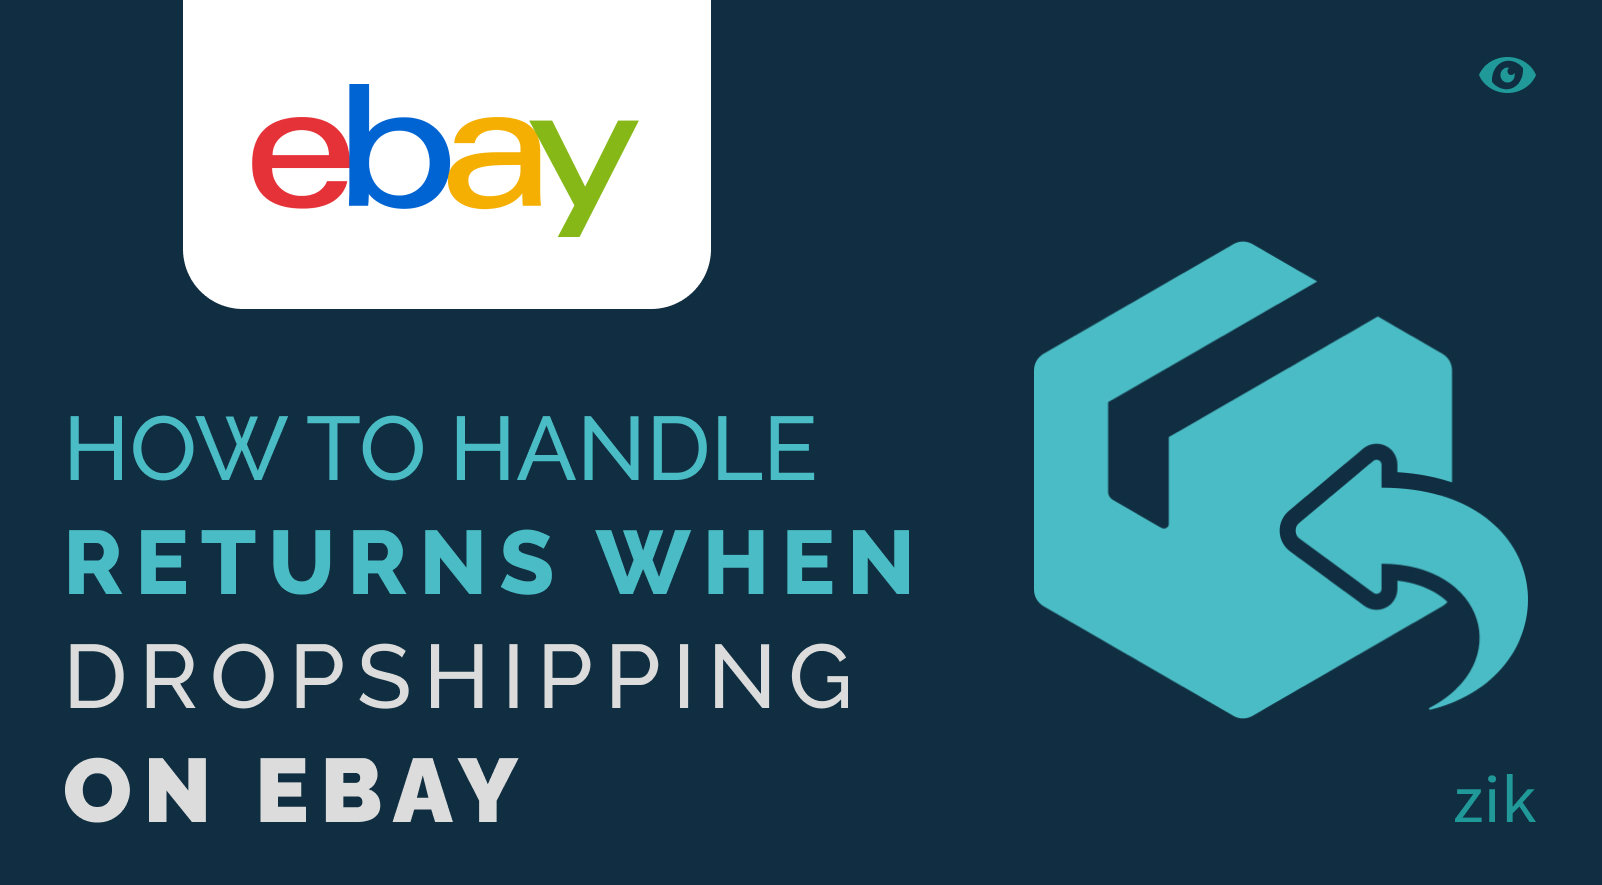 How to Handle Returns When Dropshipping